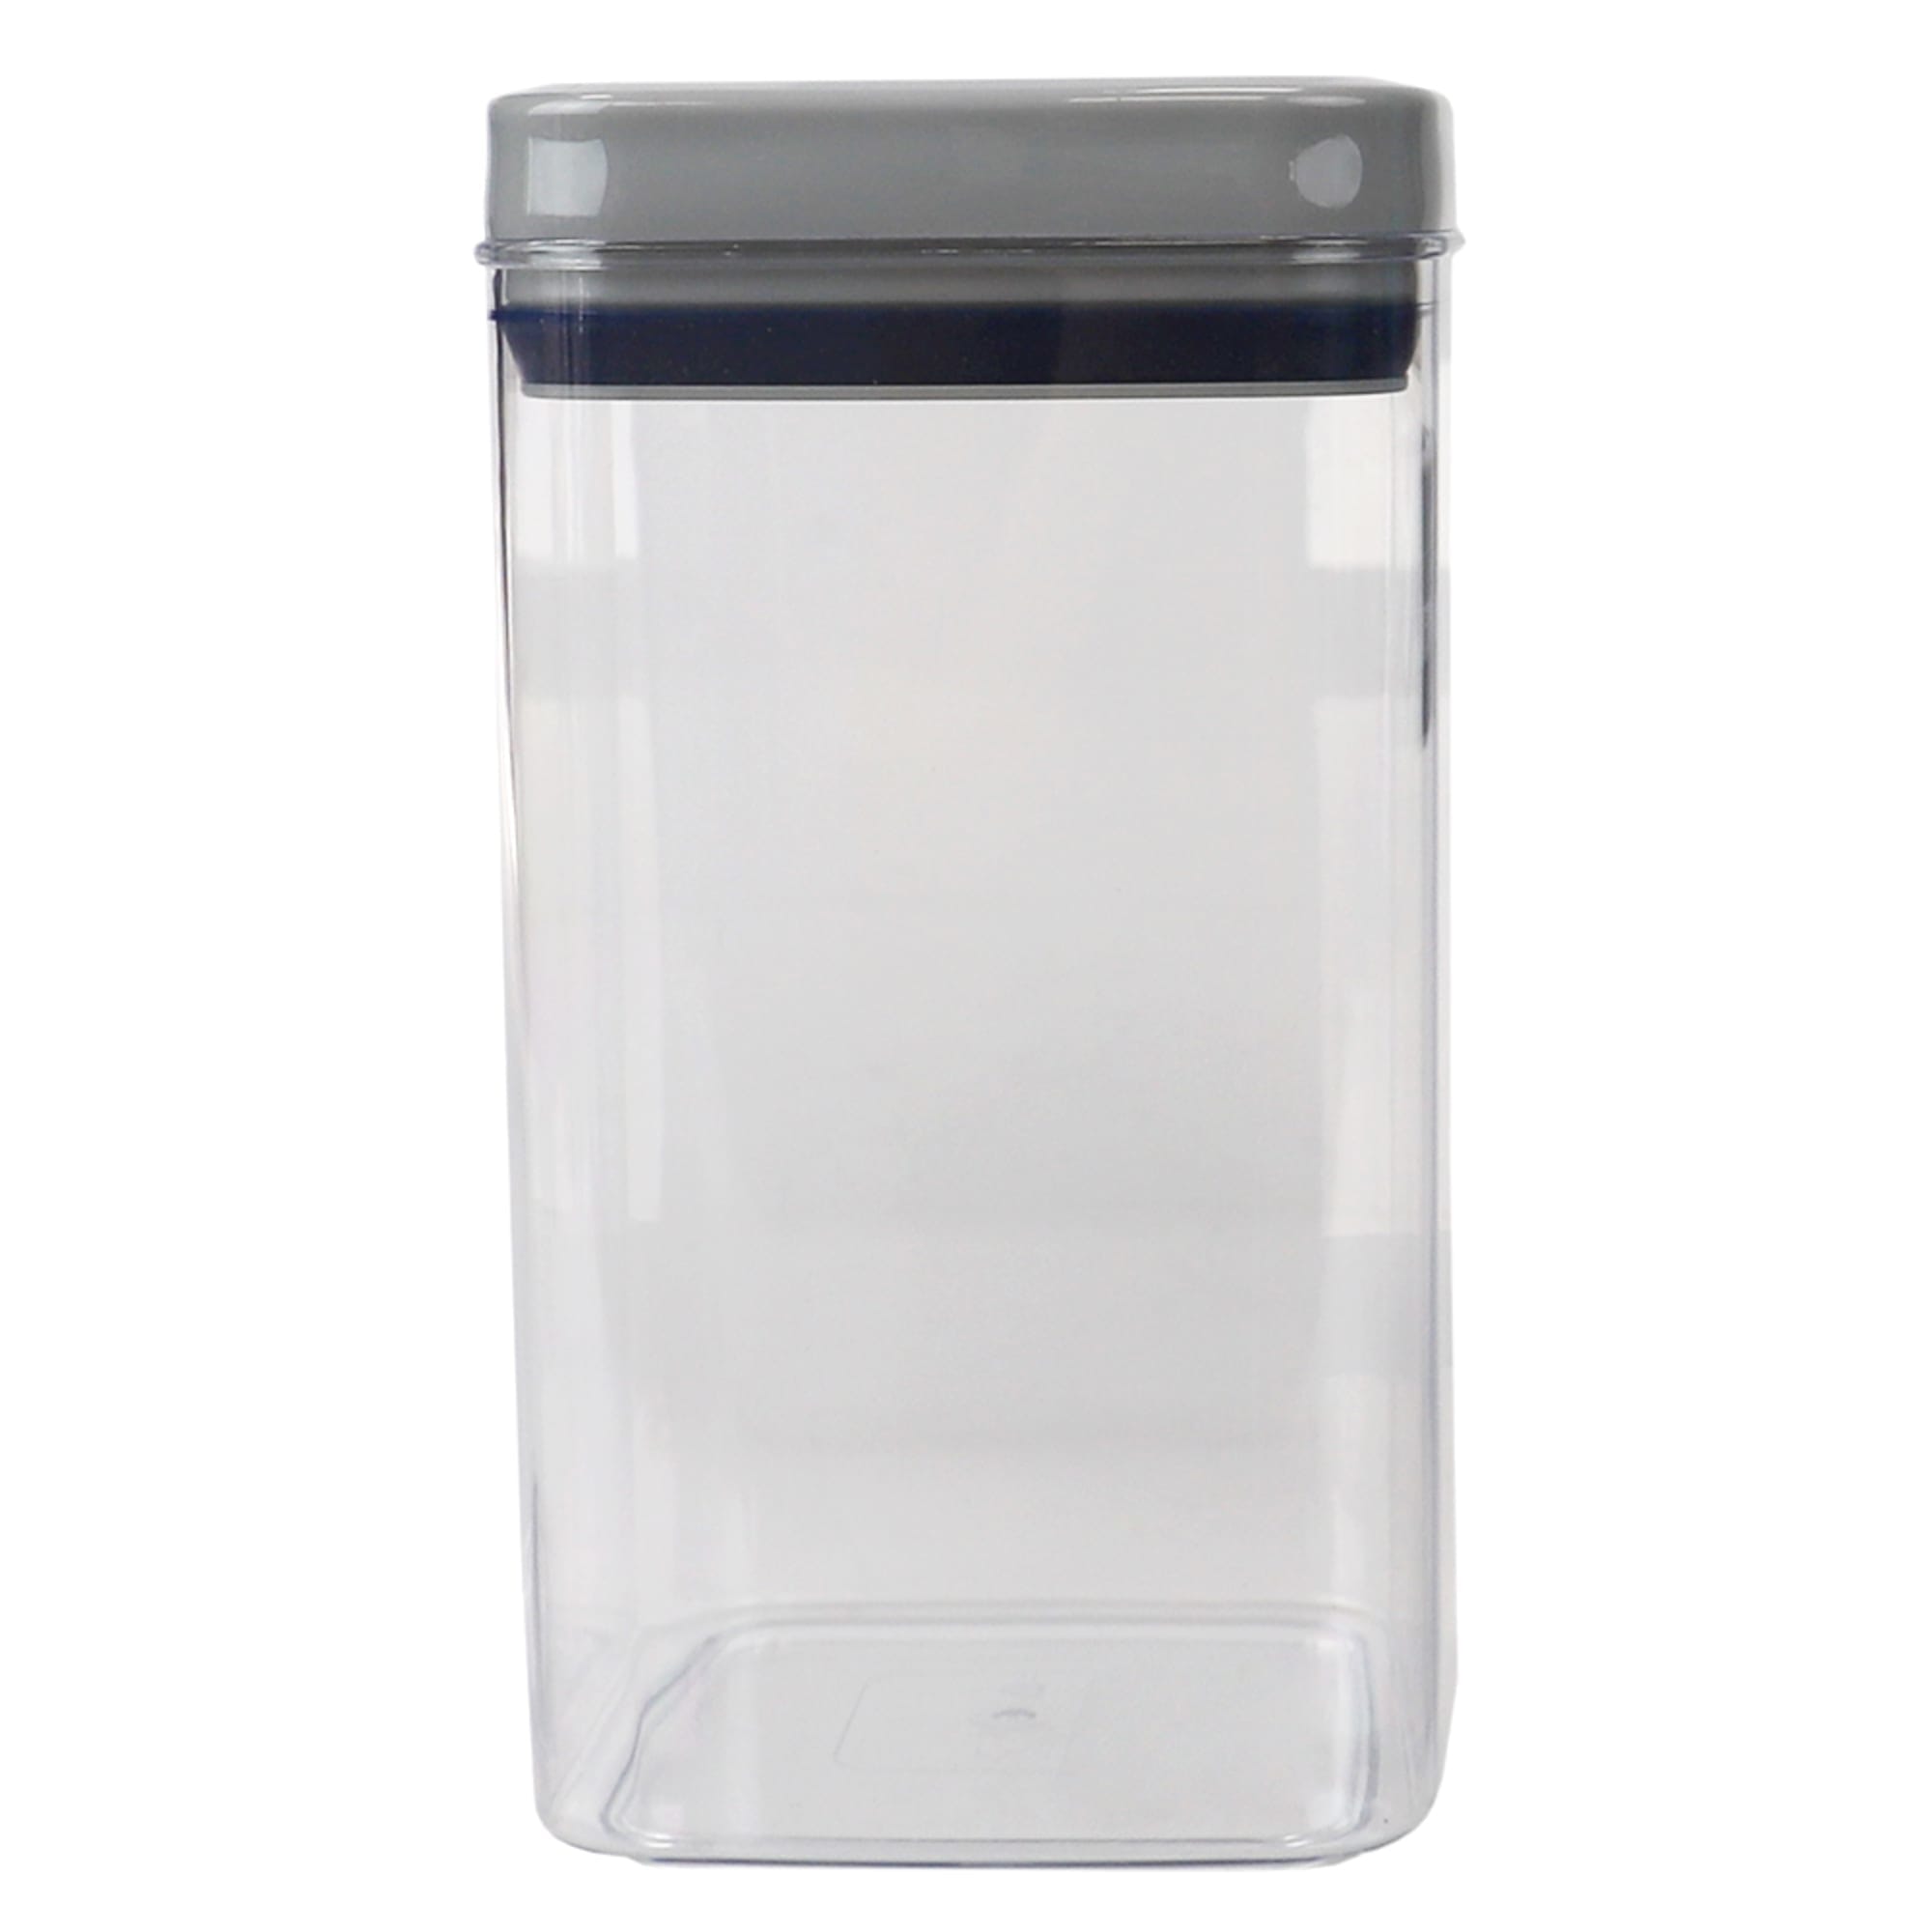 Michael Graves Design Twist ‘N Lock Square 2.3 Liter Clear Plastic Canister, Indigo $8.00 EACH, CASE PACK OF 6